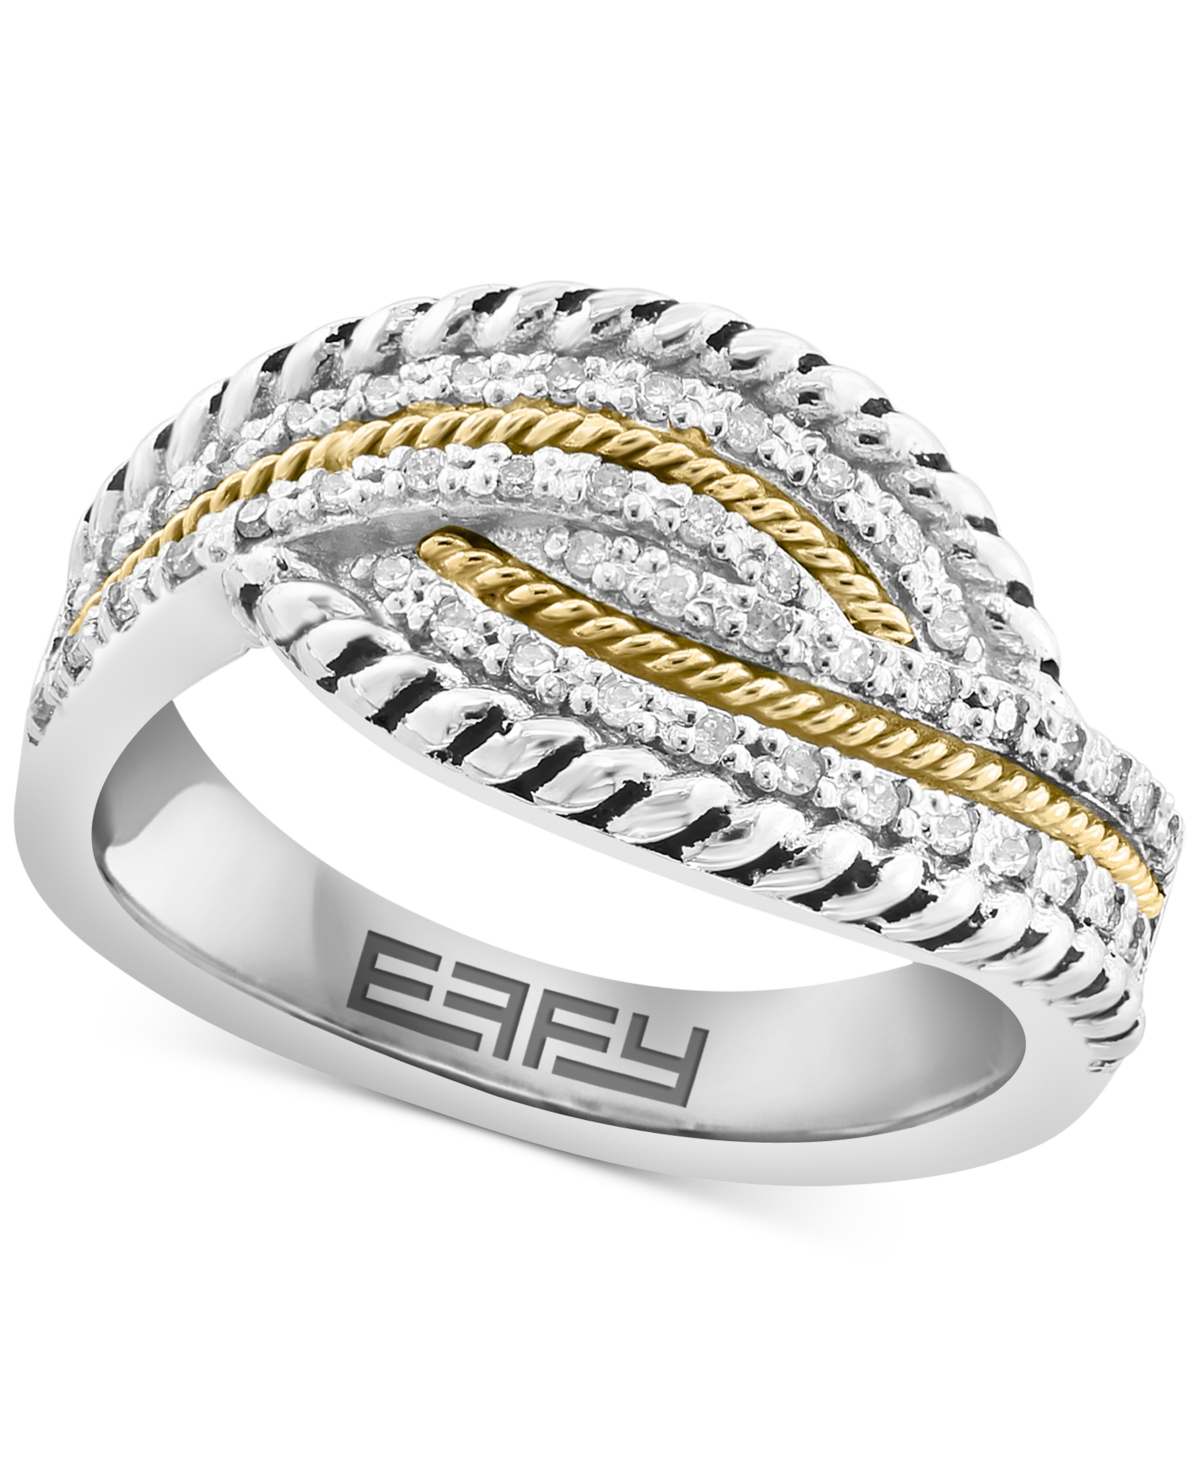 Effy Diamond Swirl Crossover Ring (1/5 ct. t.w.) in Sterling Silver & 18k Gold-Plate - K Gold Over Silver